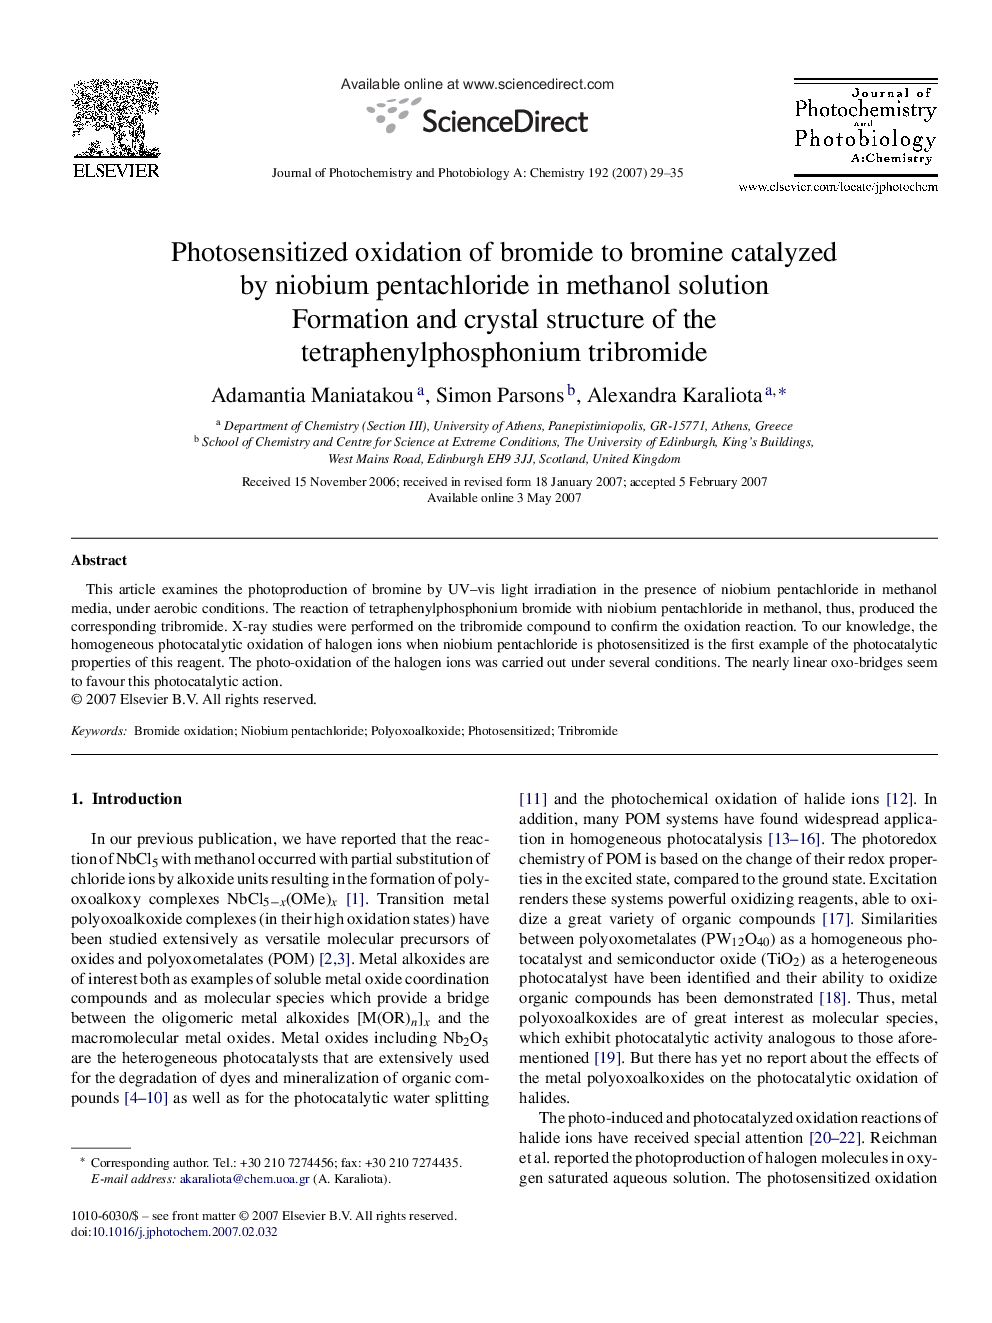 Photosensitized oxidation of bromide to bromine catalyzed by niobium pentachloride in methanol solution: Formation and crystal structure of the tetraphenylphosphonium tribromide